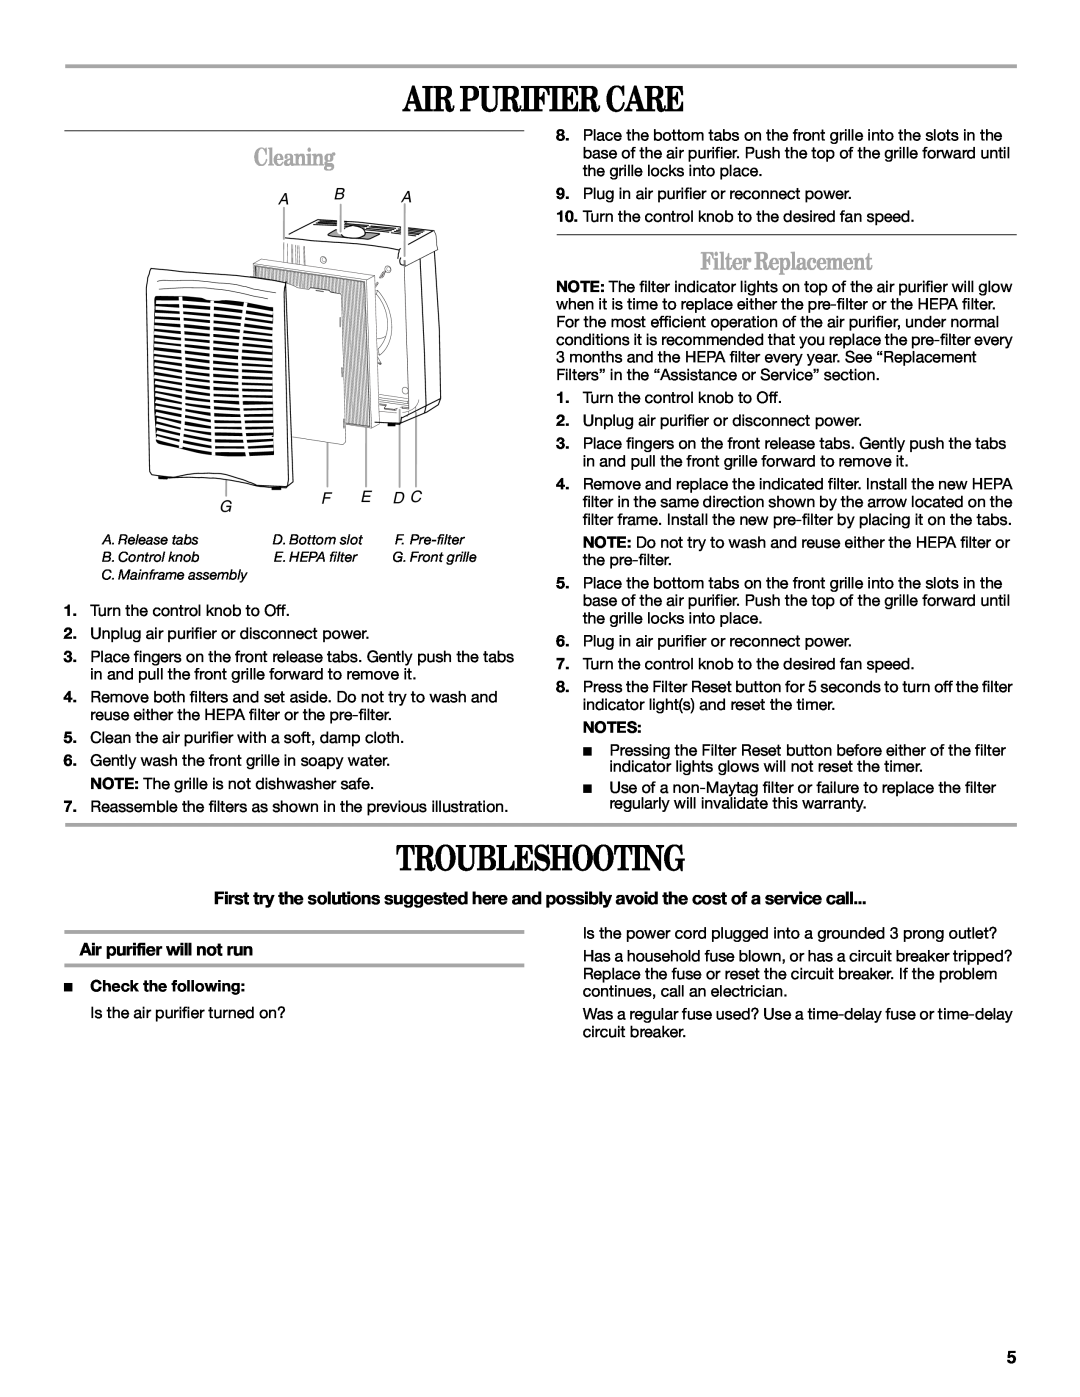 Maytag MT-AP250450 Air Purifier Care, Troubleshooting, Cleaning, Filter Replacement, Air purifier will not run, A B A 